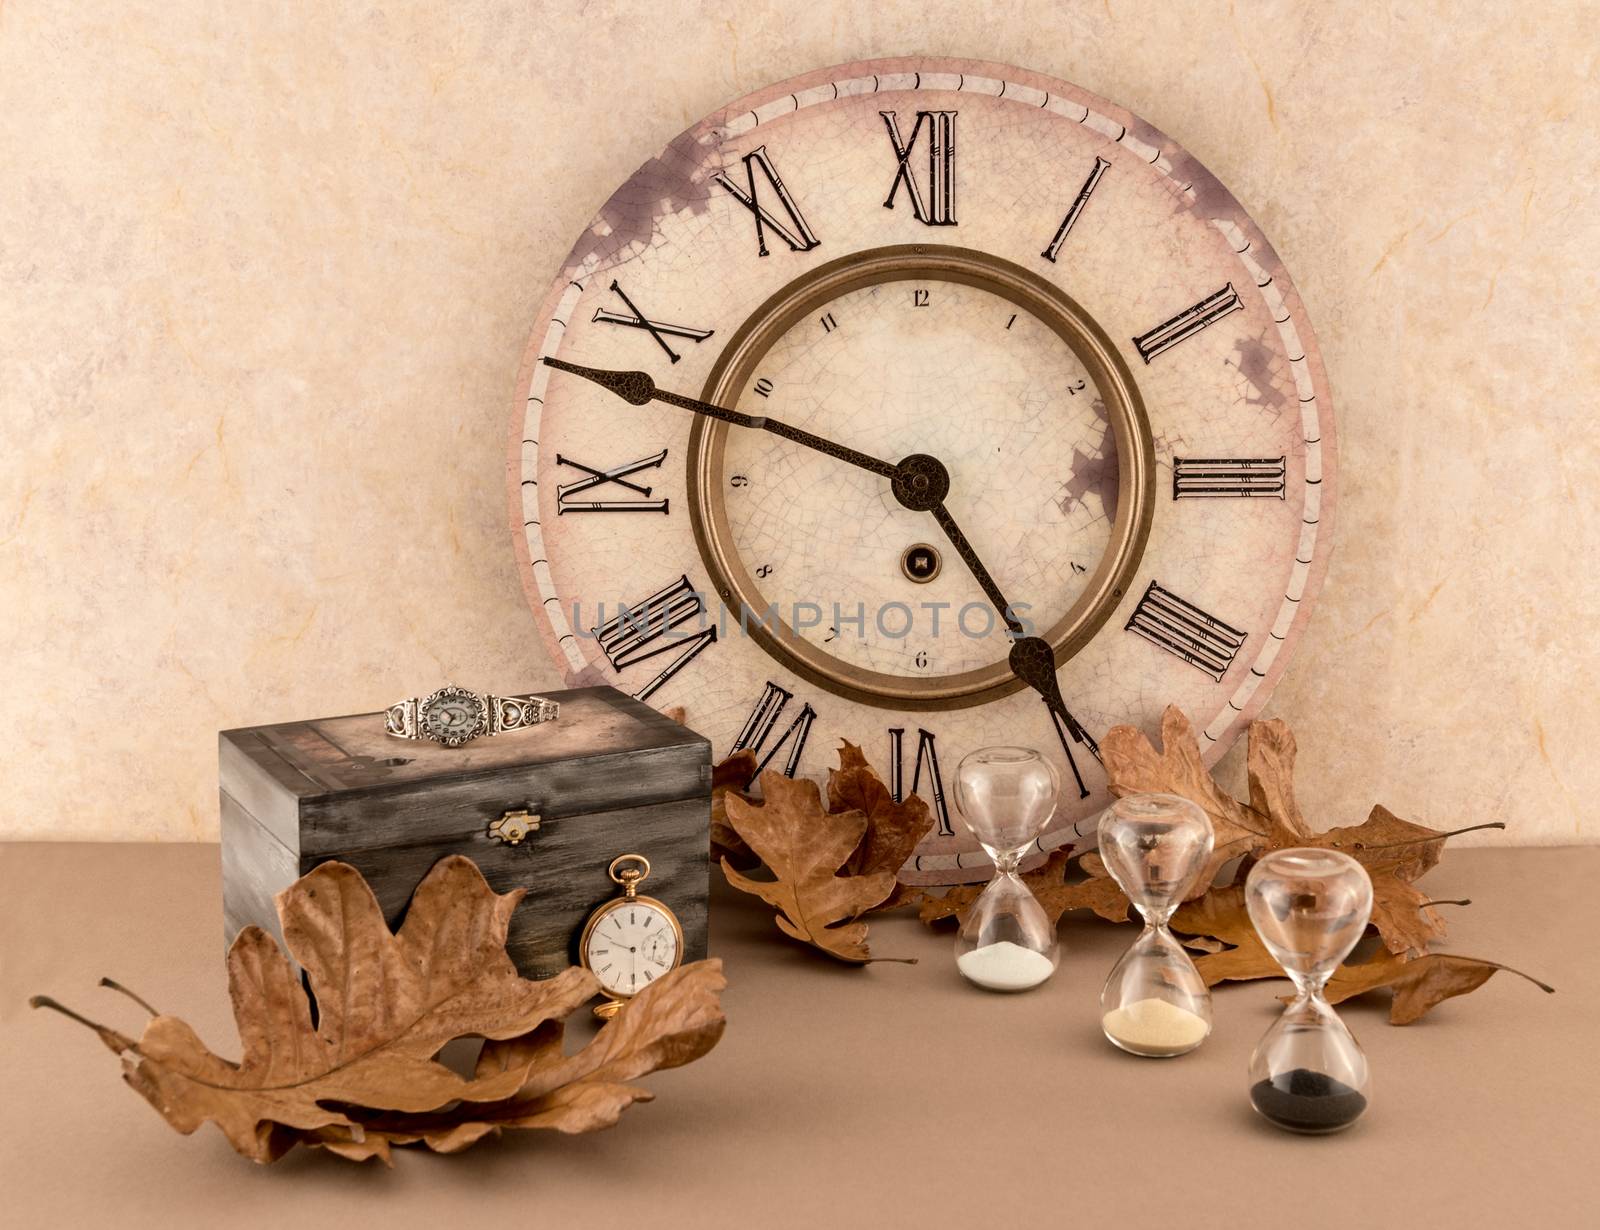 "Time" theme with wall clock, hourglasses, wristwatch, pocket watch, and Autumn leaves